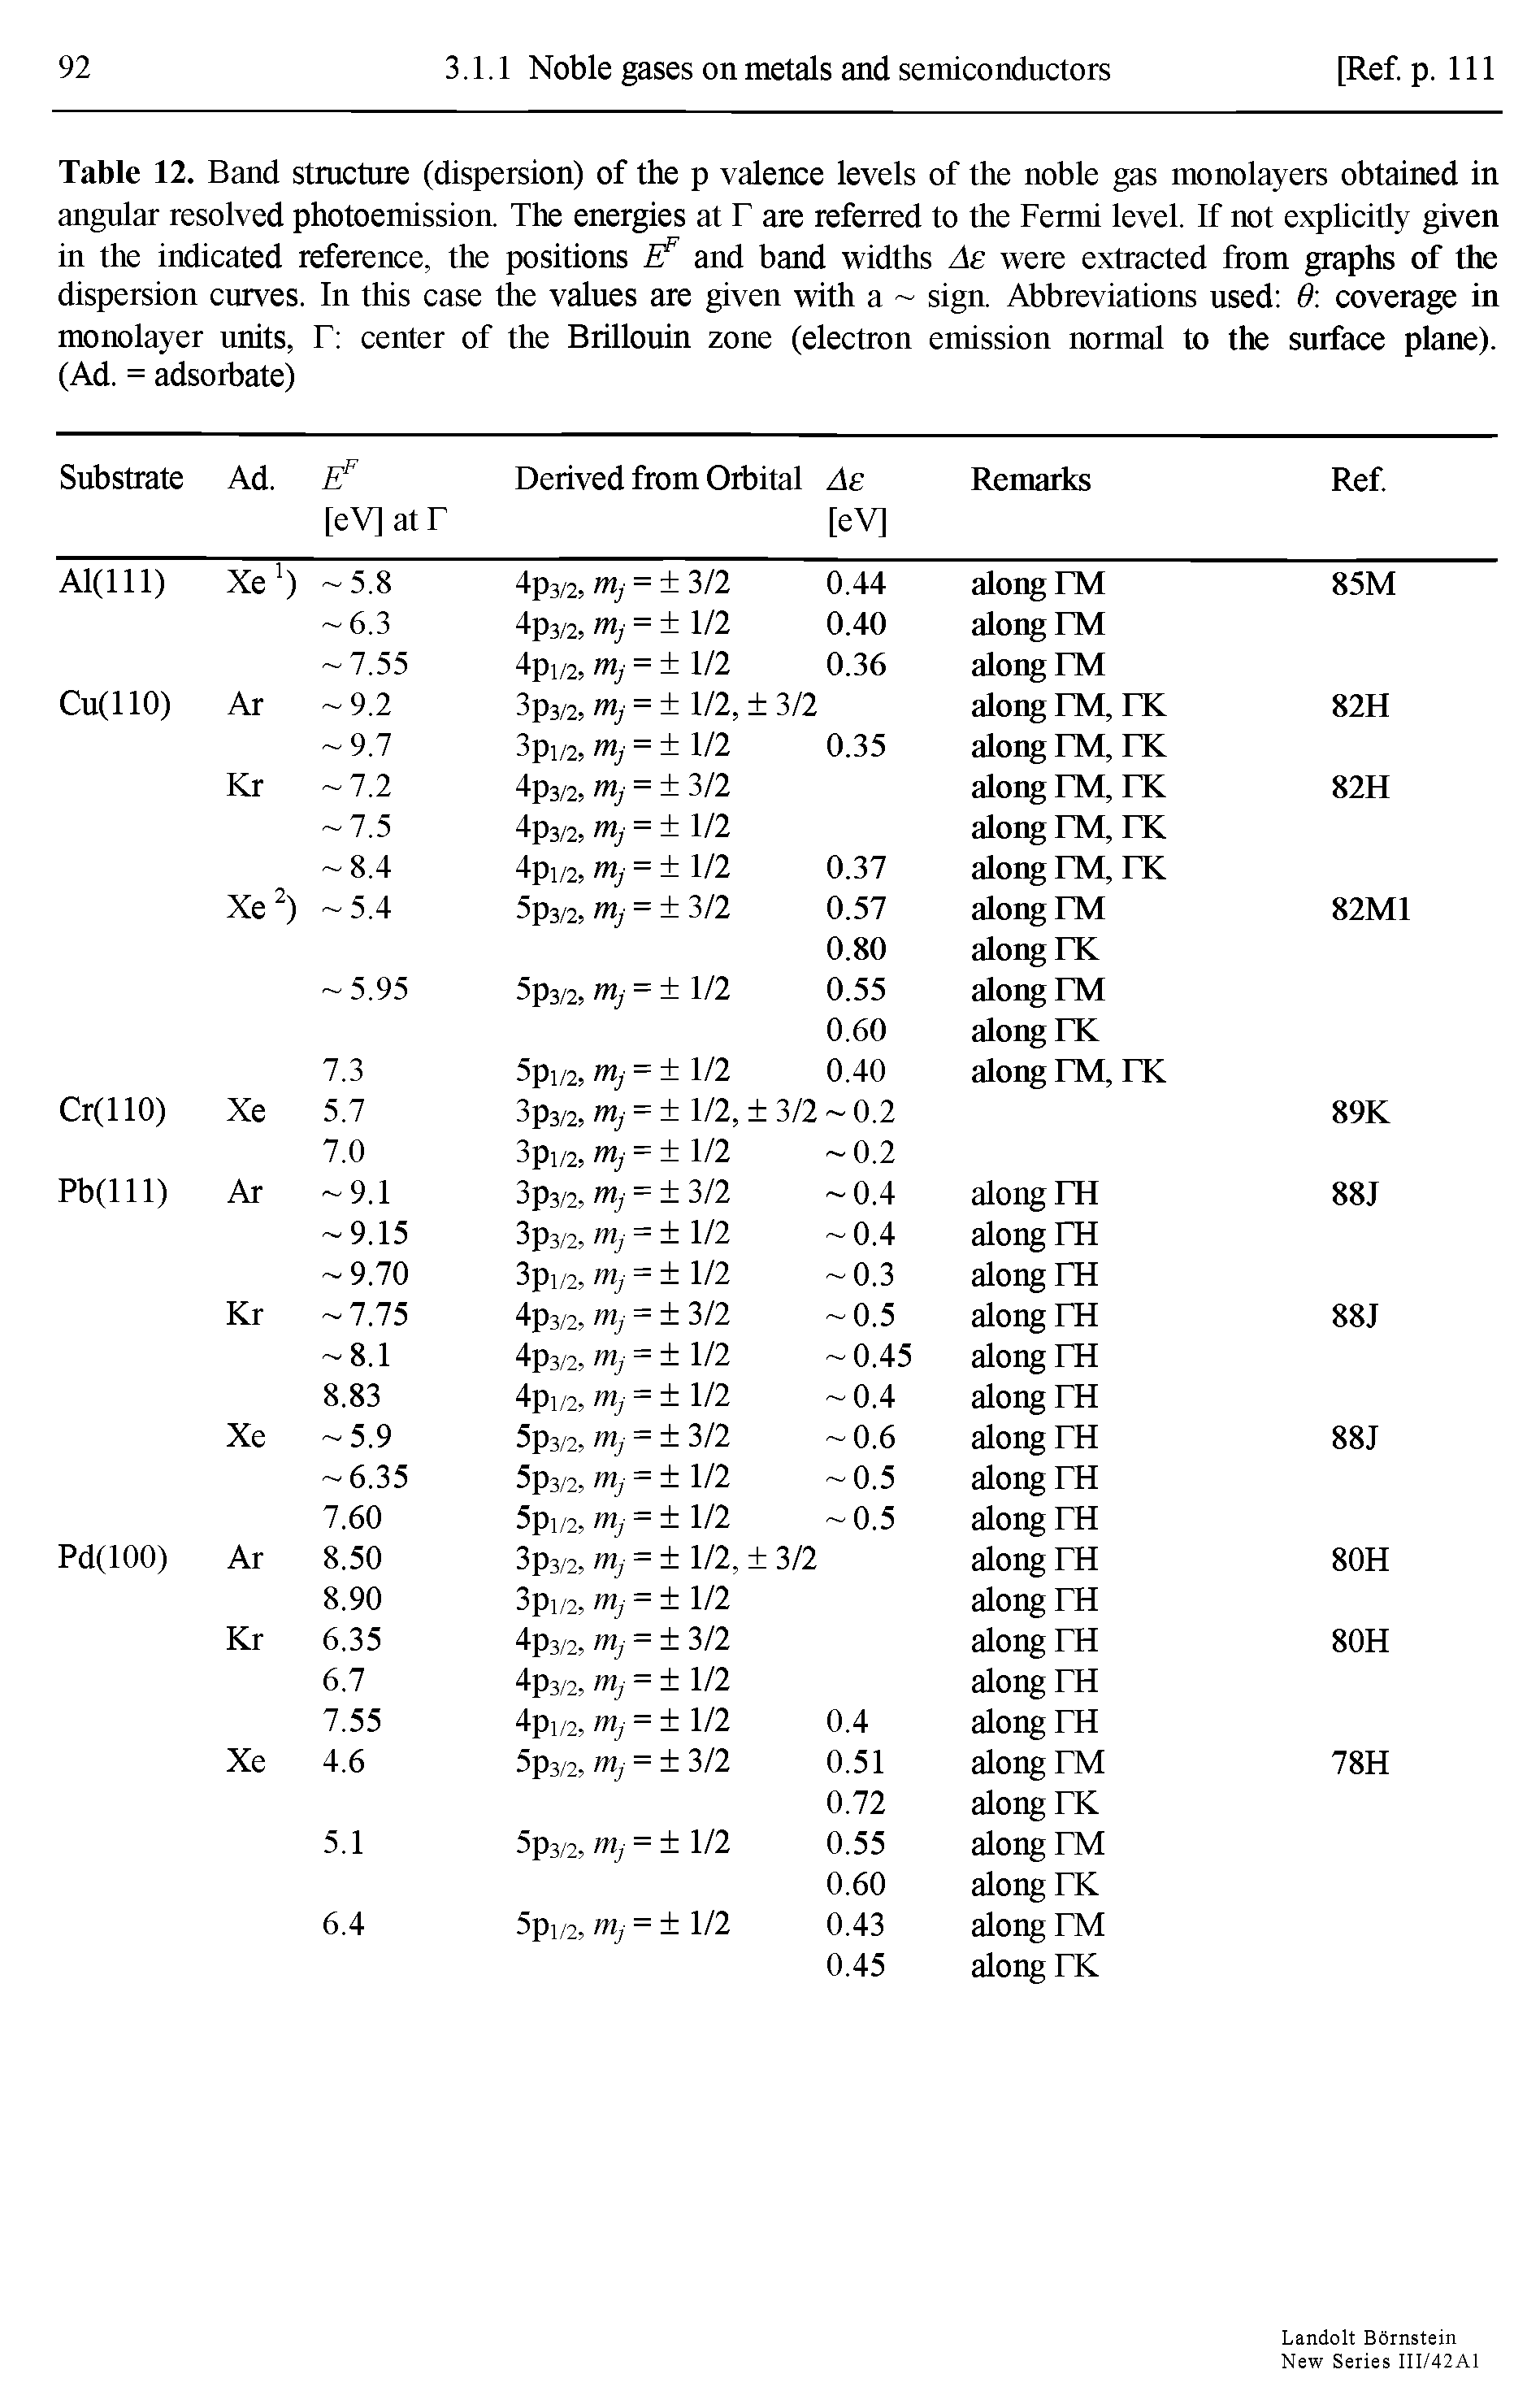 Table 12. Band structure (dispersion) of the p valence levels of the noble gas monolayers obtained in angular resolved photoemission. The energies at T are referred to the Fermi level. If not explicitly given in the indicated reference, the positions Ff and band widths Ae were extracted from graphs of the dispersion curves. In this case the values are given with a sign. Abbreviations used 9 coverage in monolayer imits, F center of the Brillouin zone (electron emission normal to the surface plane). (Ad. = adsorbate)...